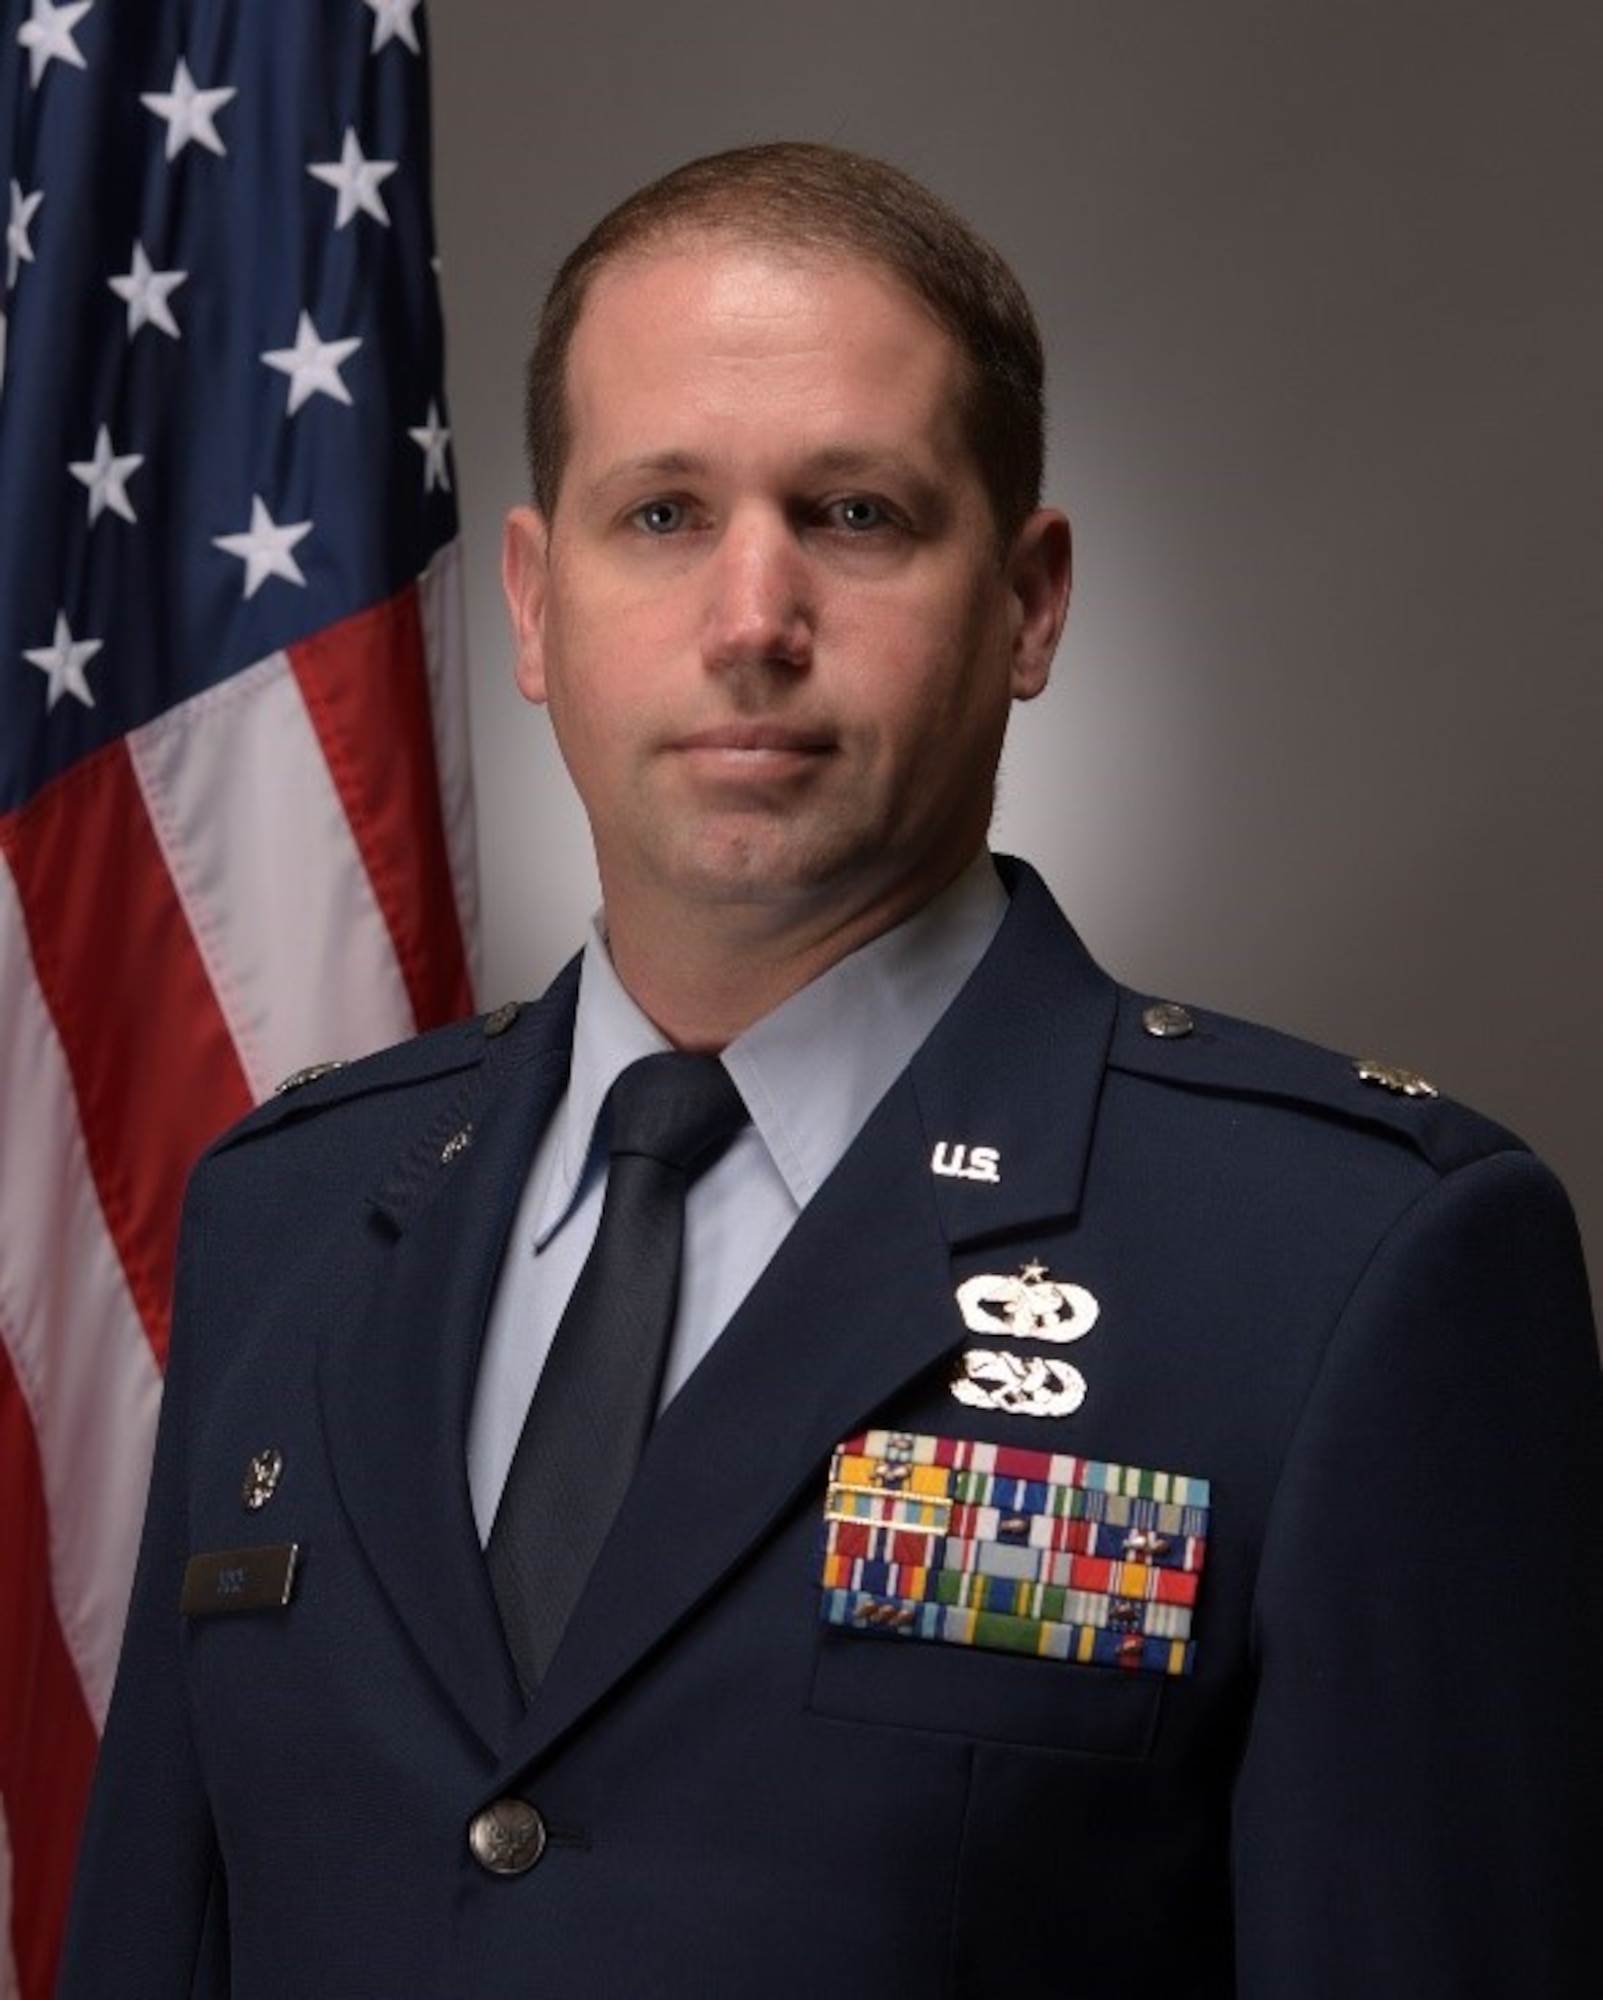 U.S. Air Force Lt. Col. Charles Rice, 426th Air Base Squadron commander, posed for an official photo. (Courtesy photo)